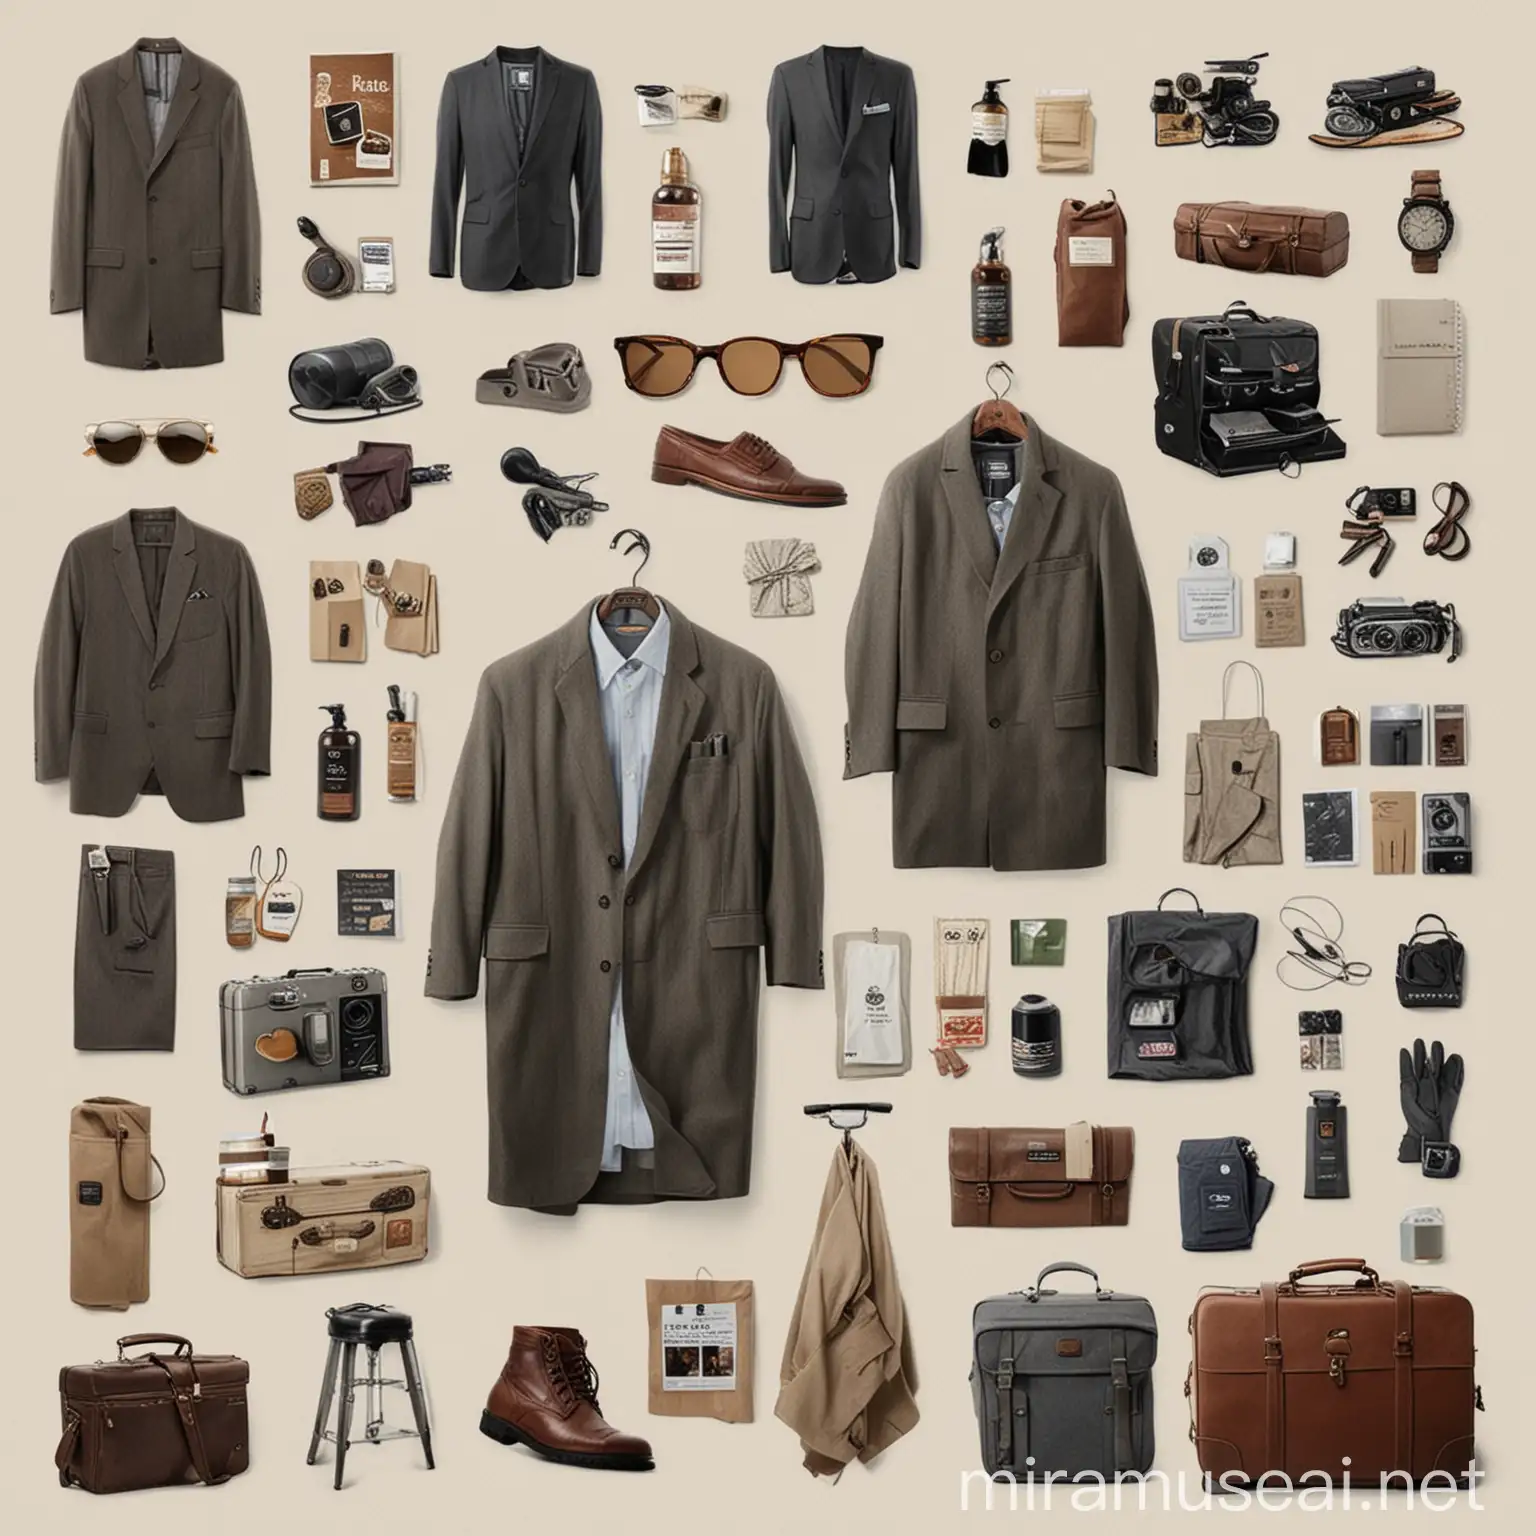 Create a mood board which includes product examples, middle aged men (25-40) years old and the environment images. Also, it should include luggage products and also office products. Moreover, there should be travel steam iron product photos too. Create a mood board about these phtoos.